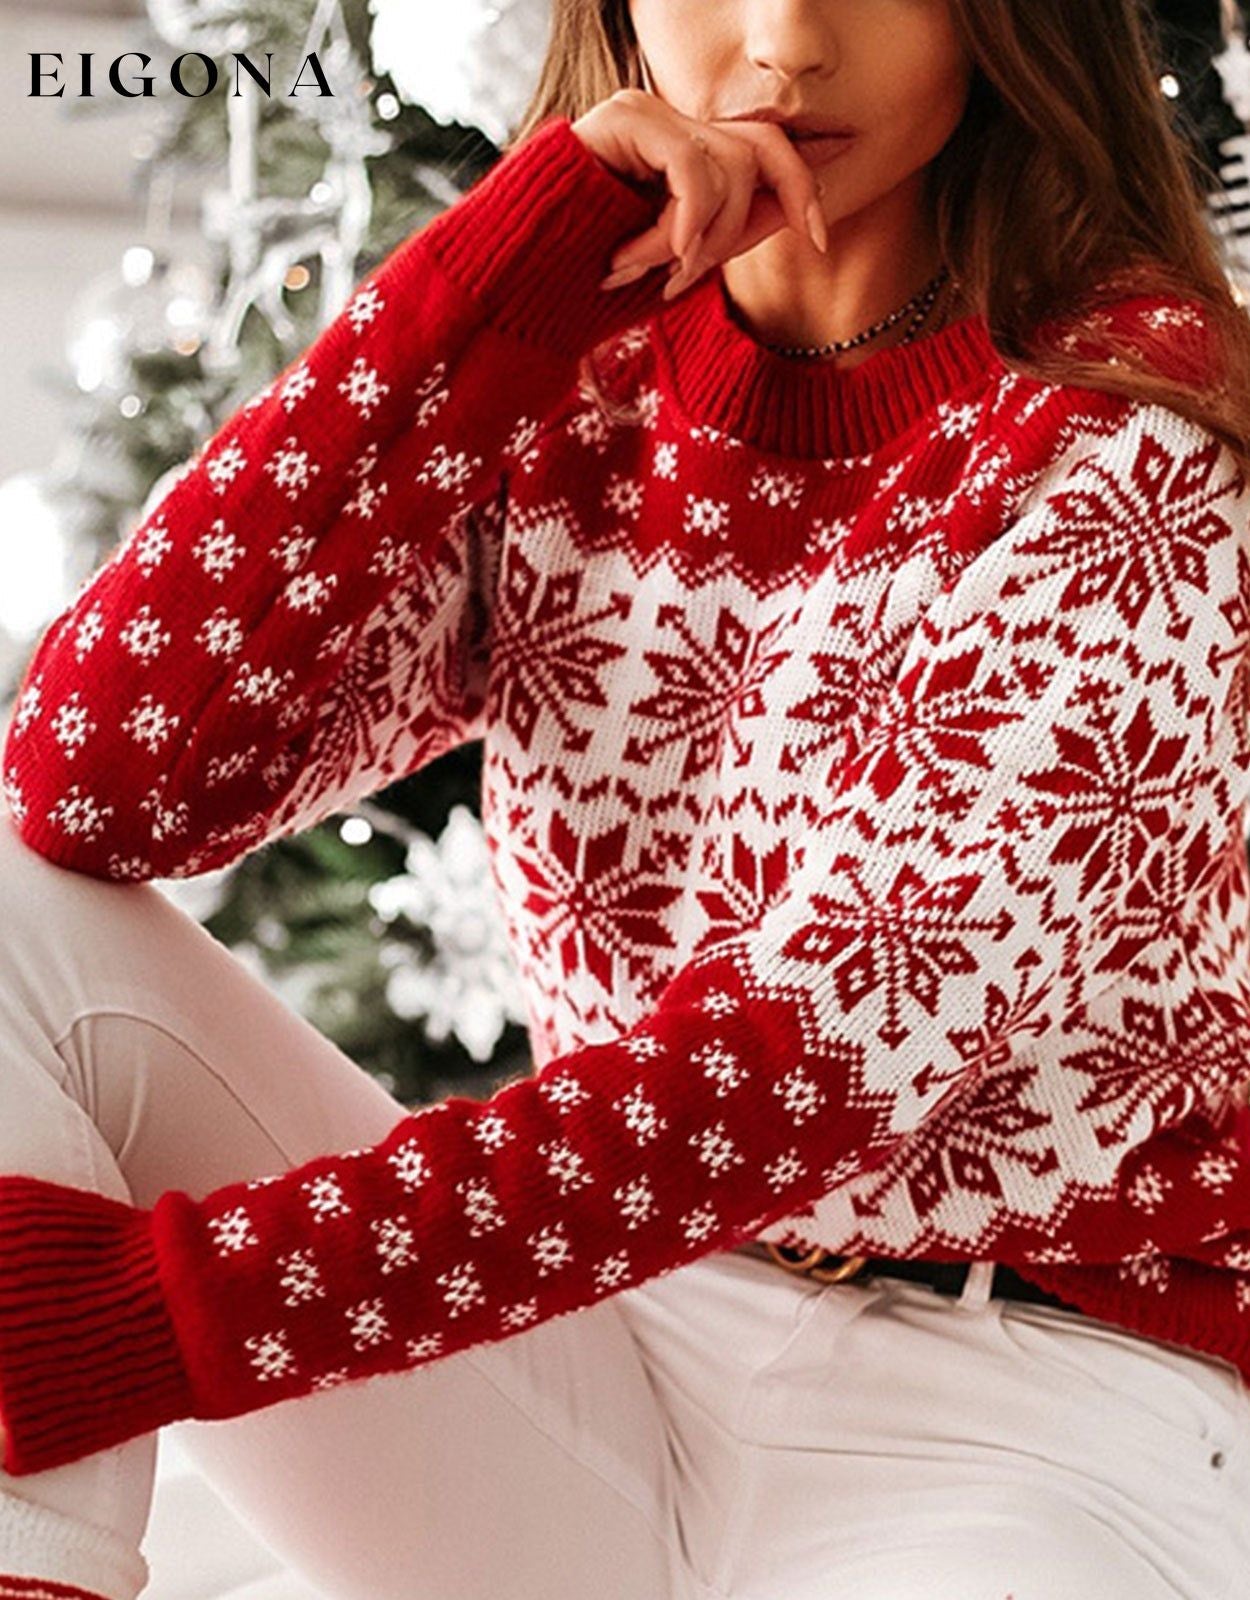 Snowflake Round Neck Sweater Christmas christmas sweater clothes Ship From Overseas Shipping Delay 09/29/2023 - 10/04/2023 Y@Y@D@Y